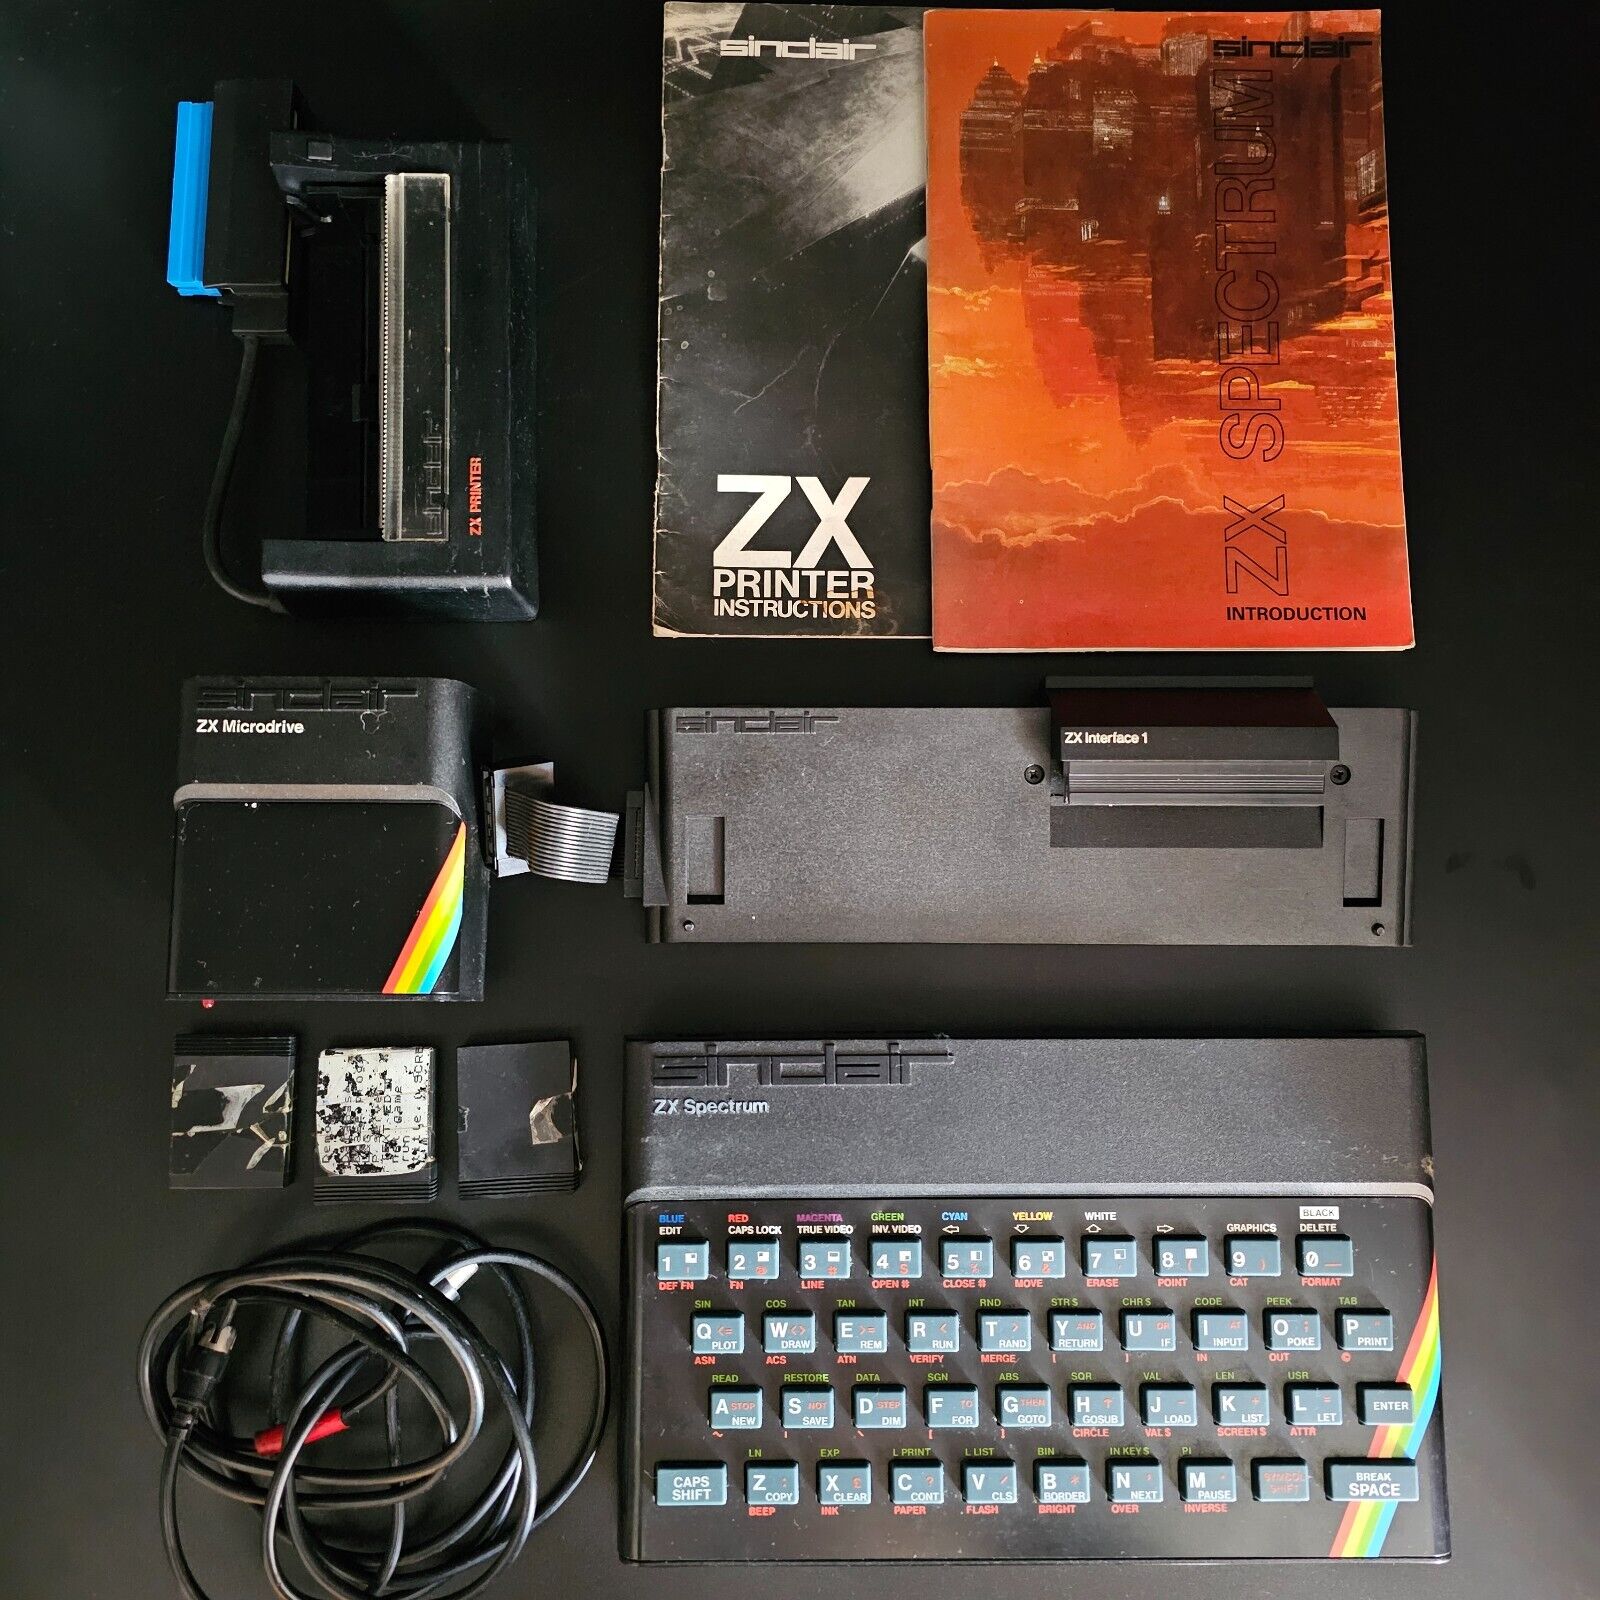 Sinclair ZX Spectrum with Interface 1, Microdrive & Printer